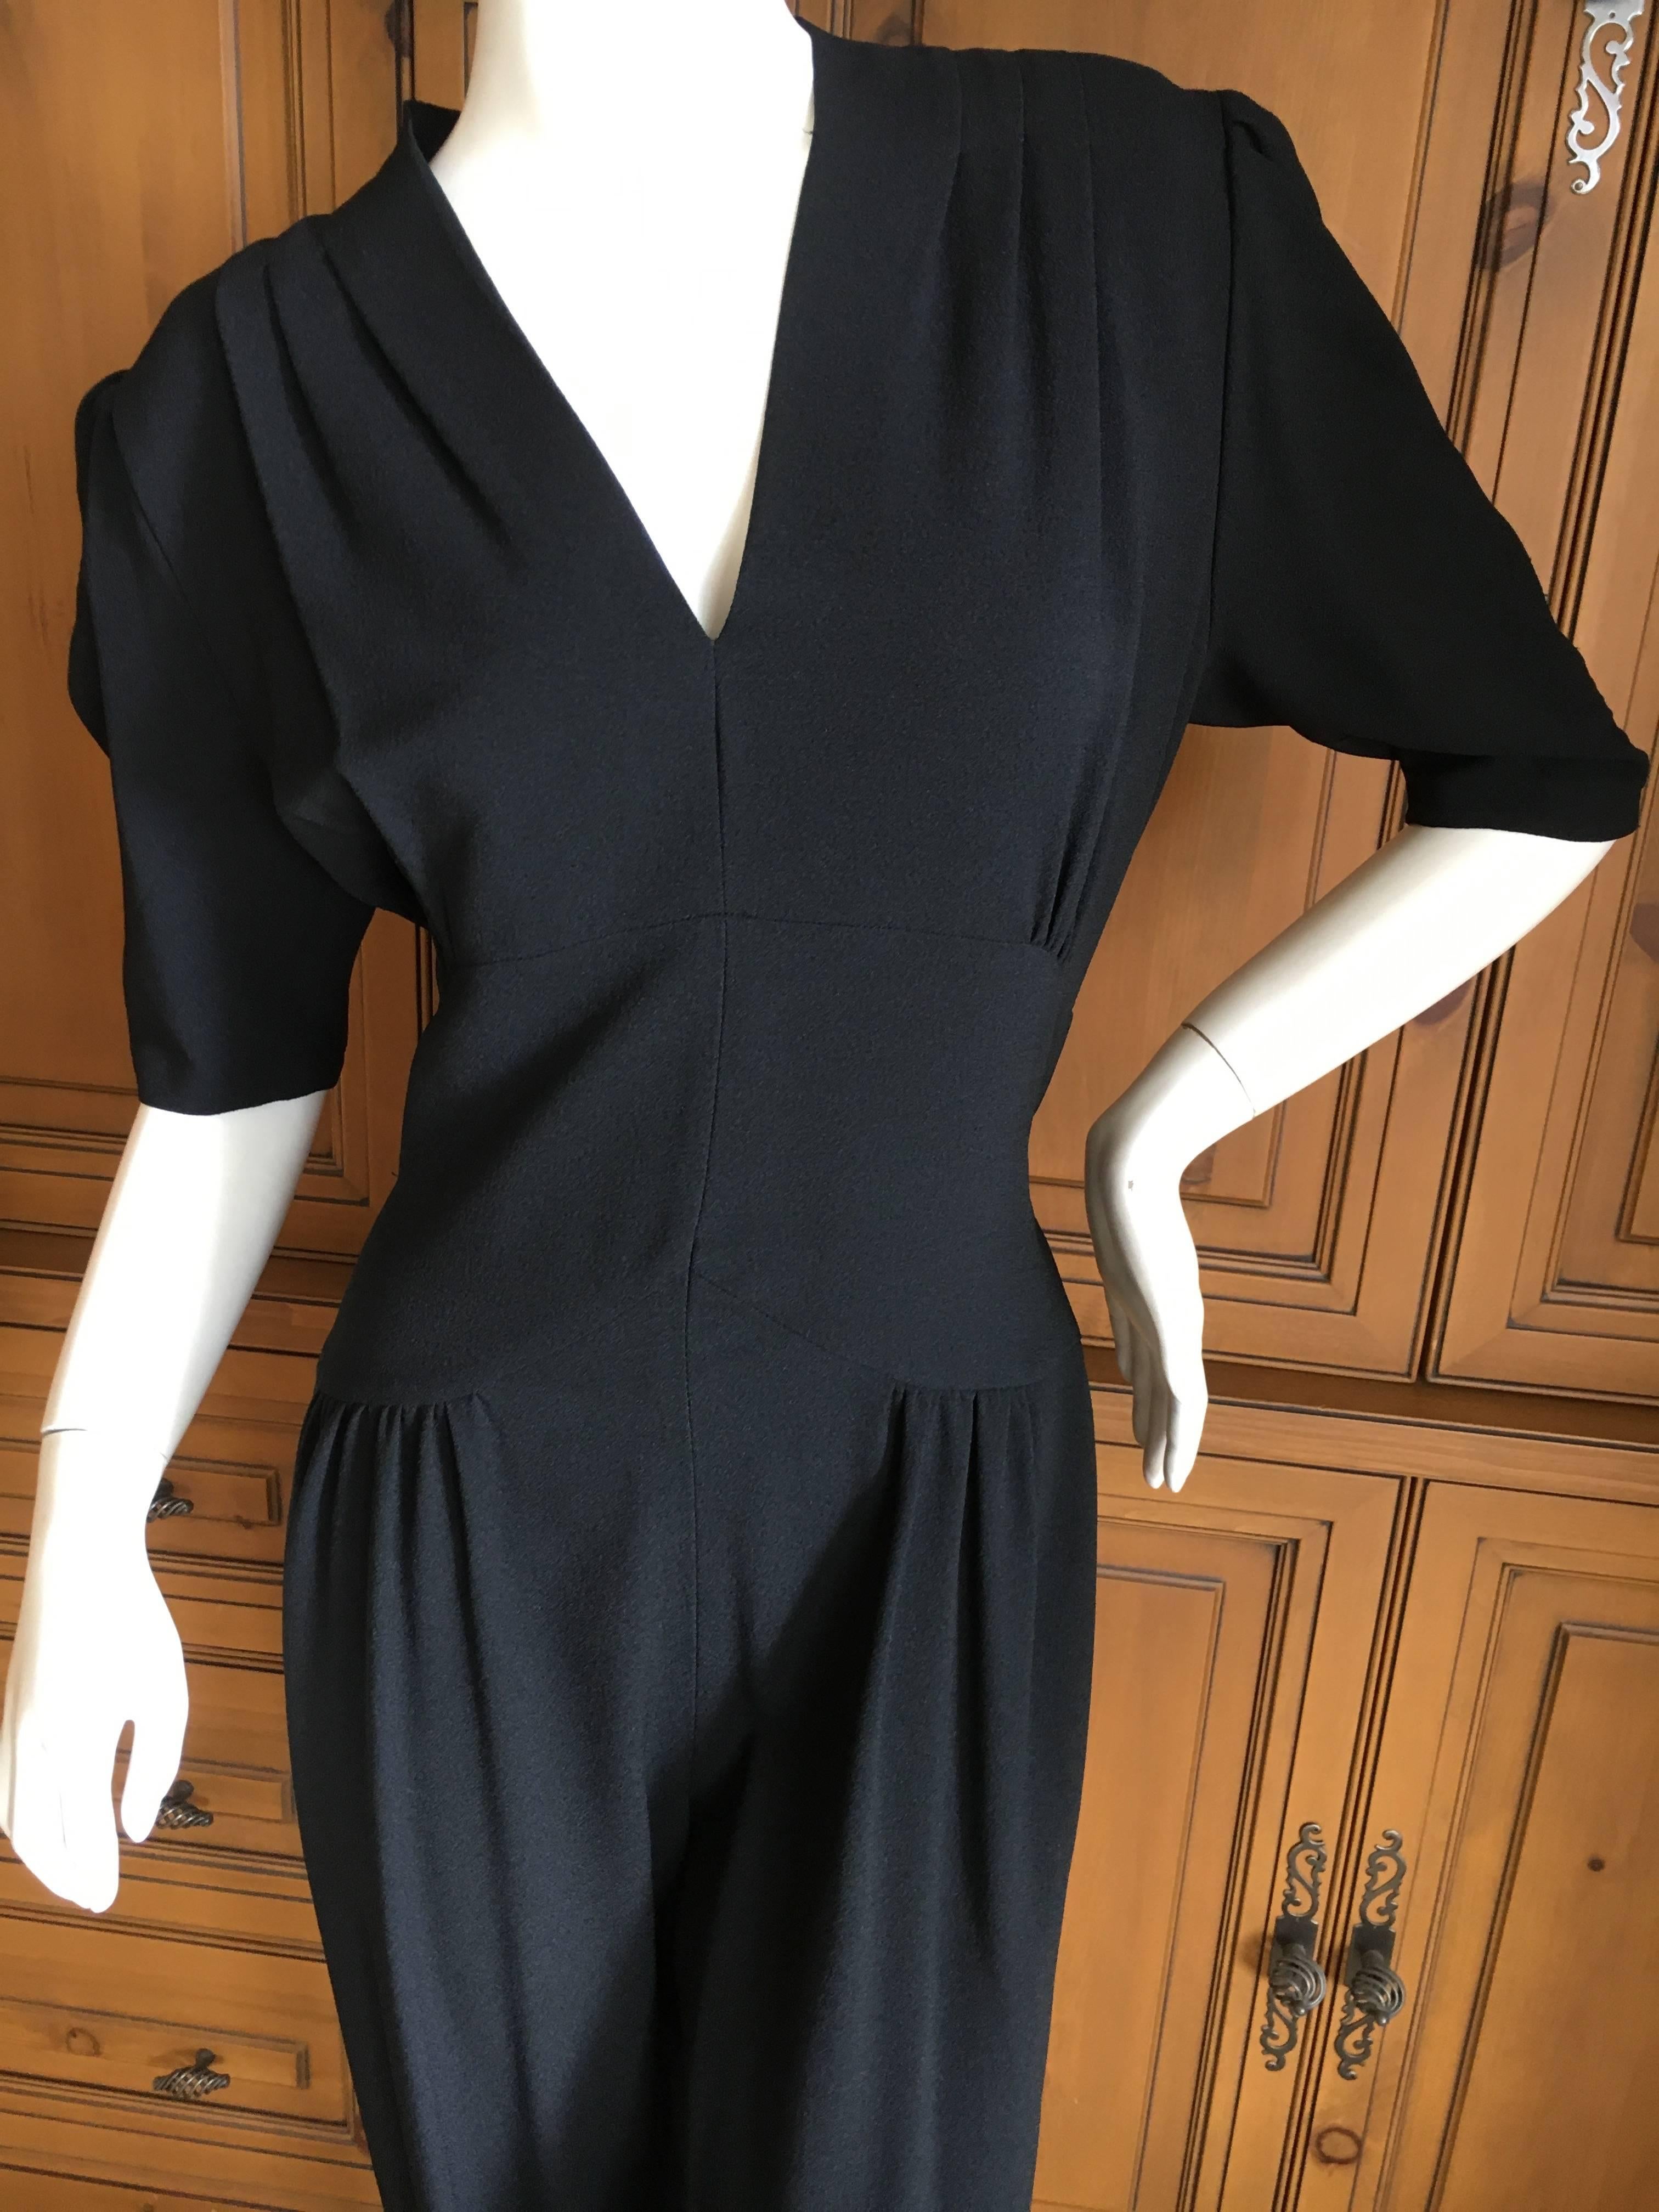 Norma Kamali Vintage Black Crepe 1930's Style Jumpsuit In Excellent Condition For Sale In Cloverdale, CA